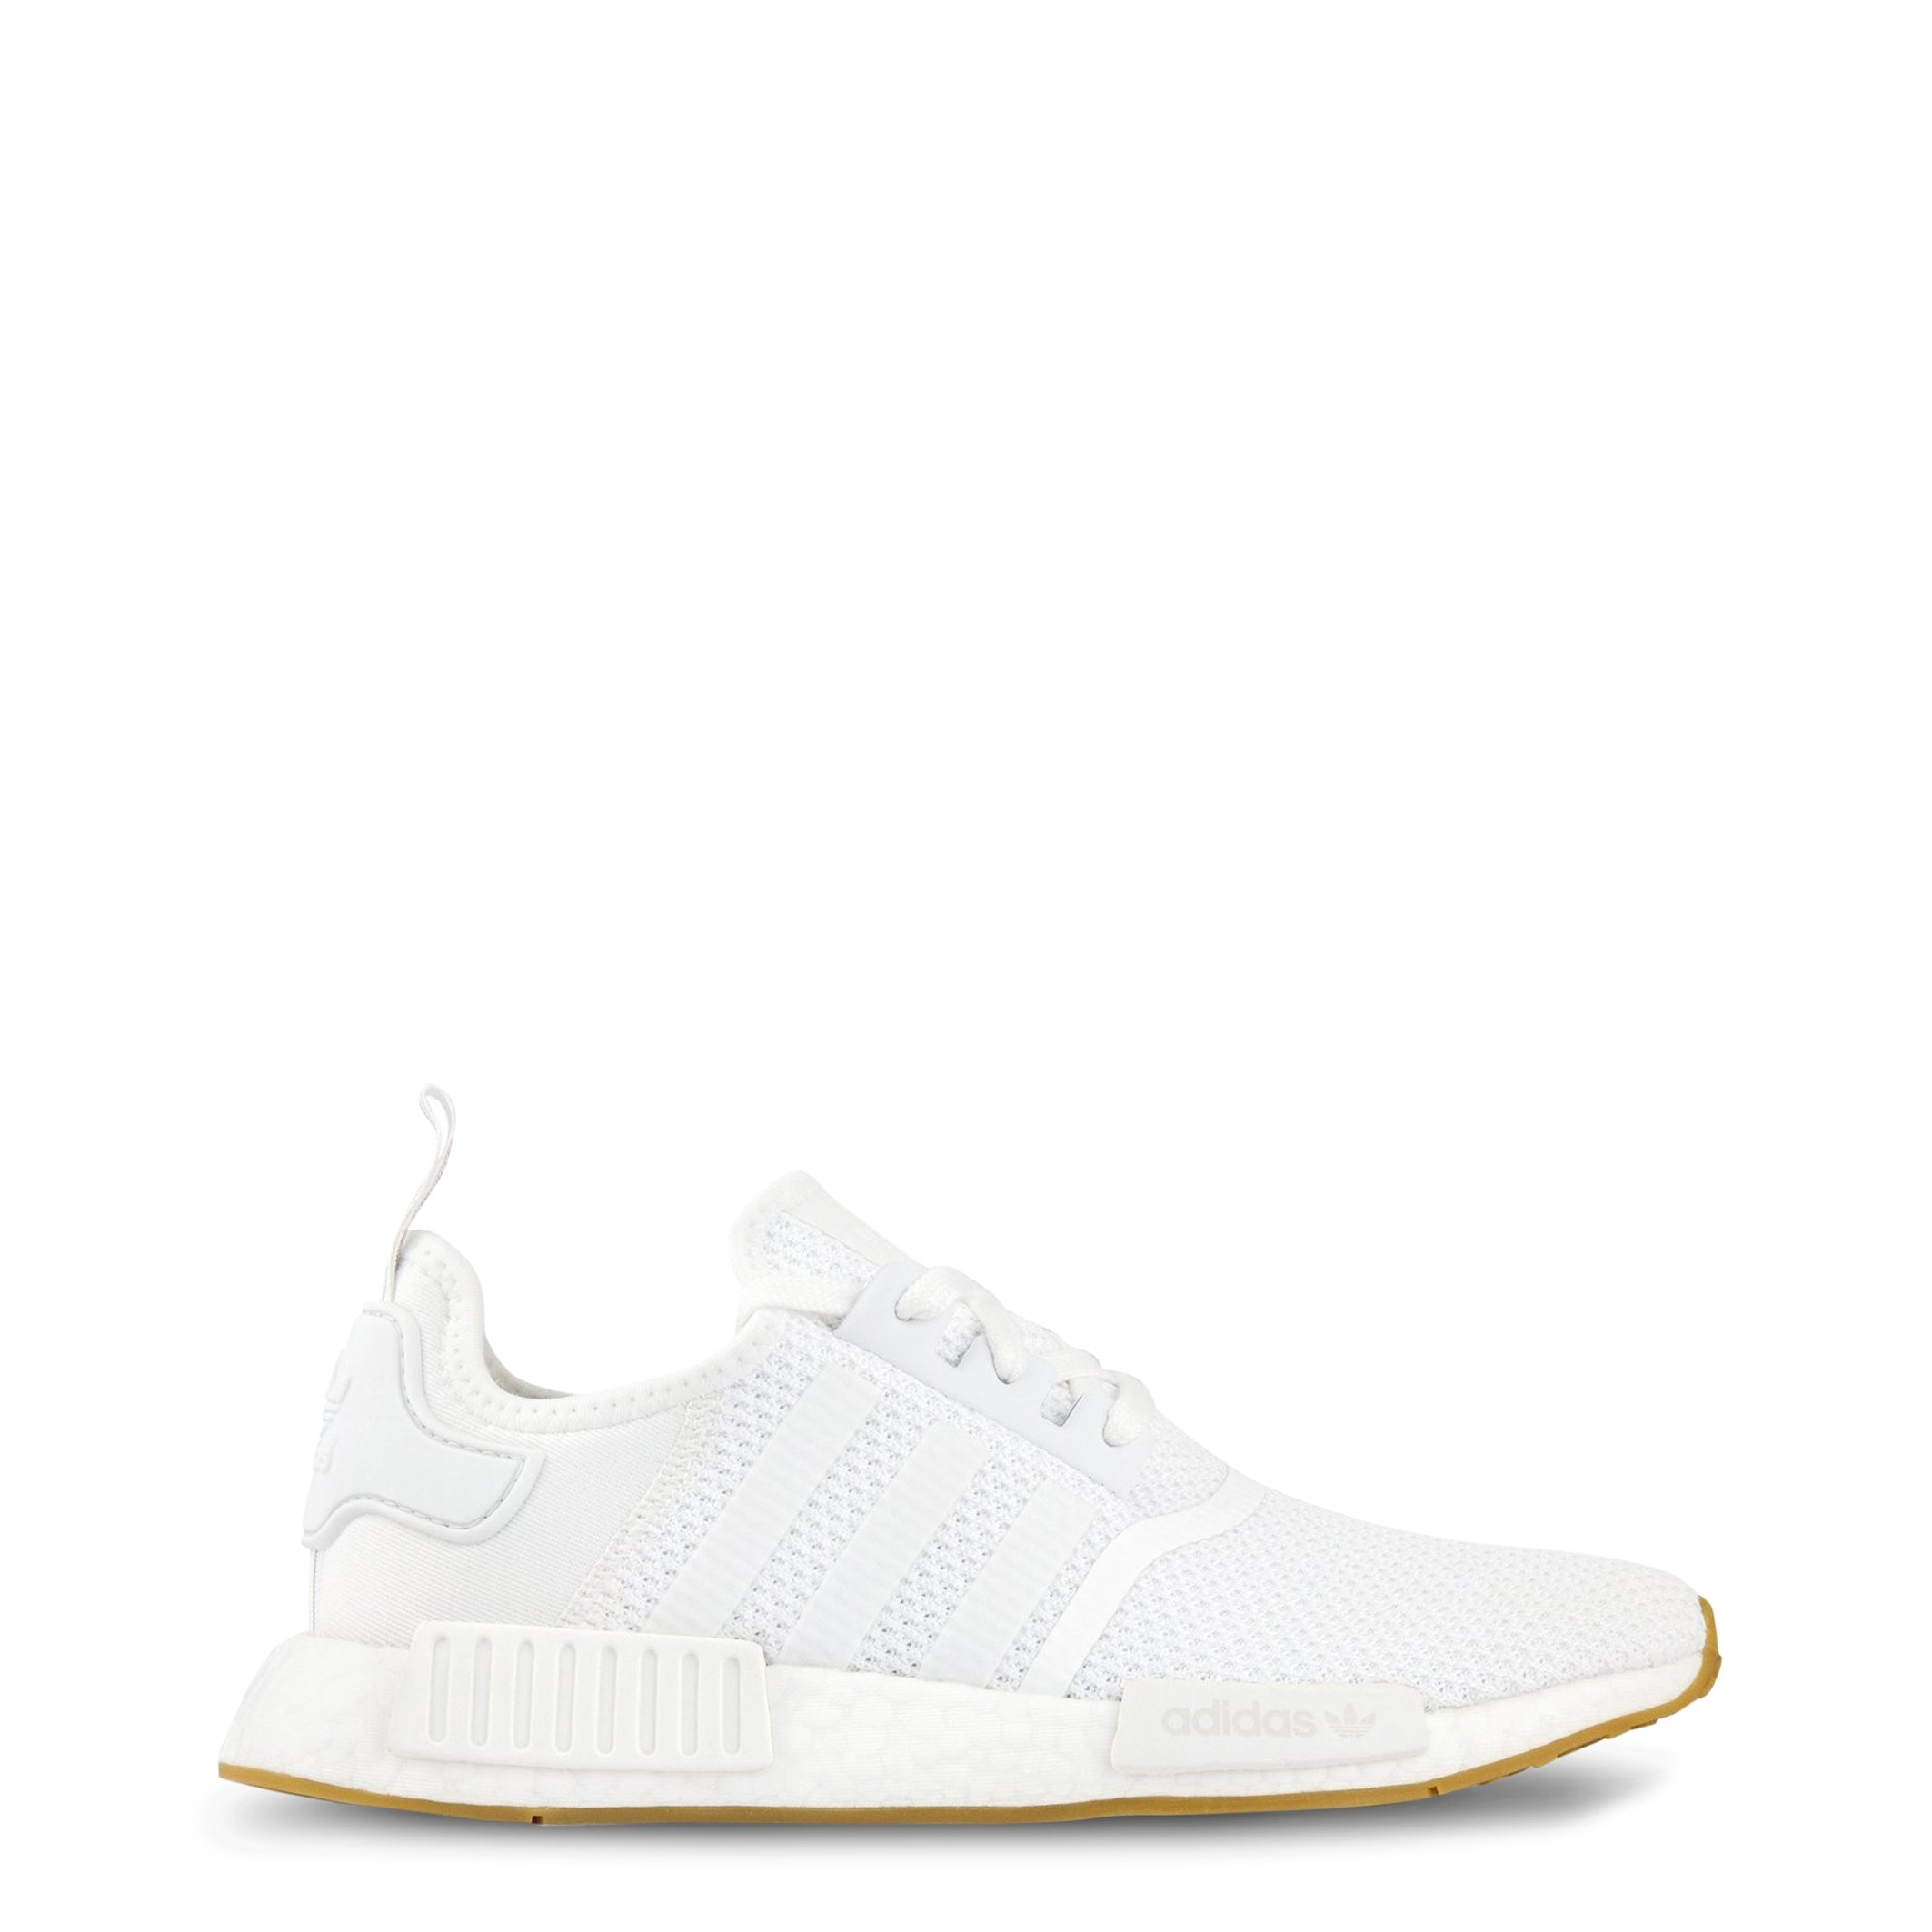 Adidas – NMD-R1_STLT – Shoes Sneakers – White / Uk 4.5 – Love Your Fashion